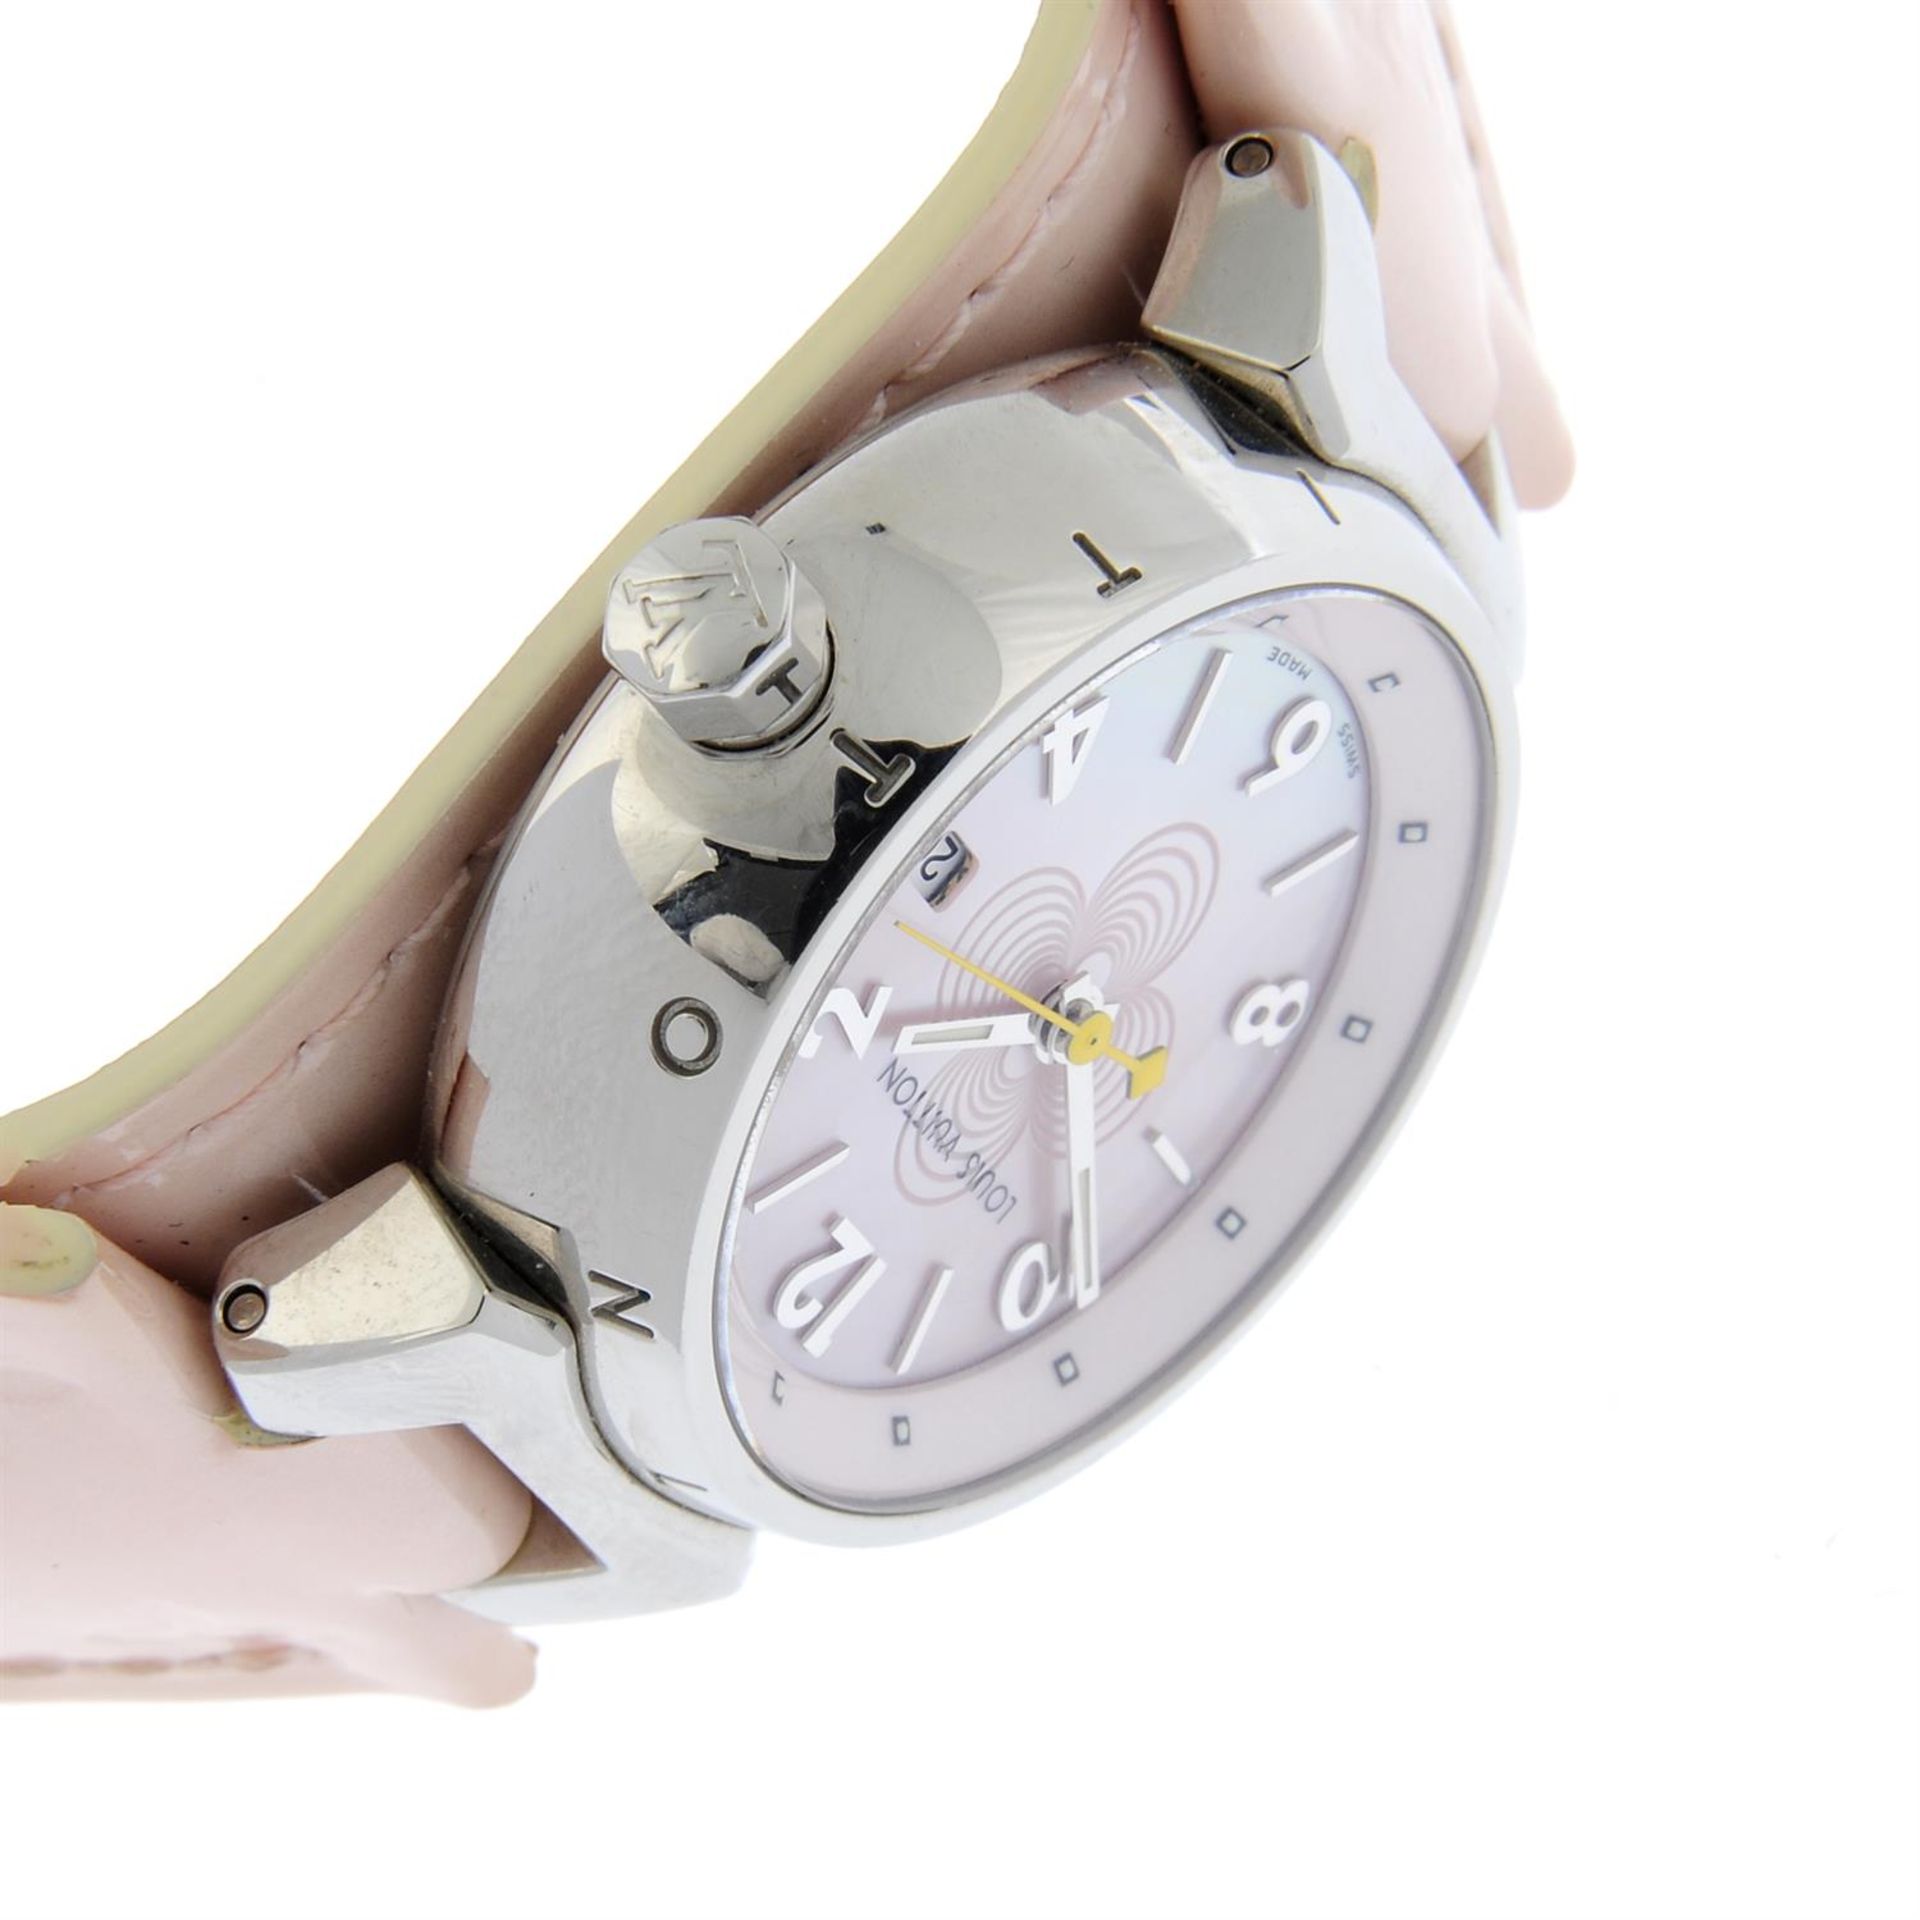 LOUIS VUITTON - a stainless steel Tambour wrist watch, 28mm. - Image 3 of 3